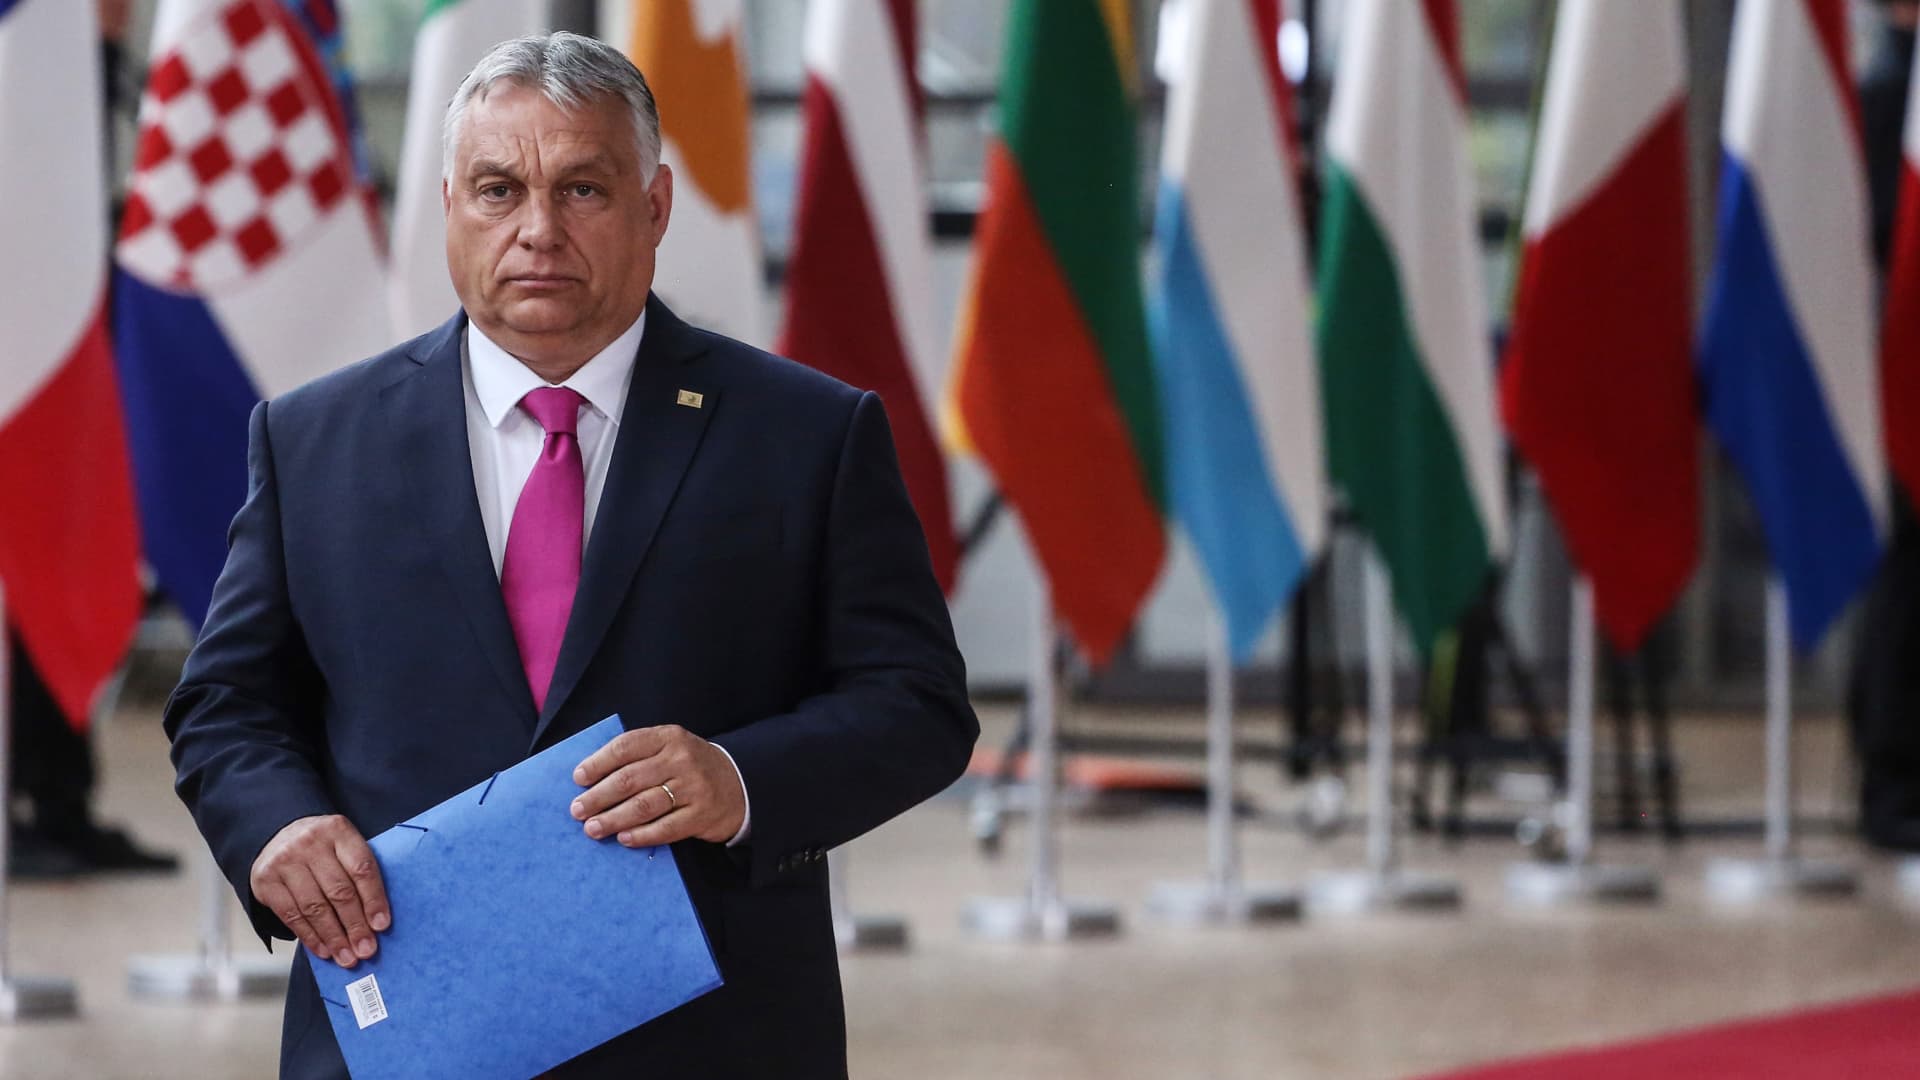 Hungary’s populist Orbán to take around EU presidency as many issues dangle in the balance